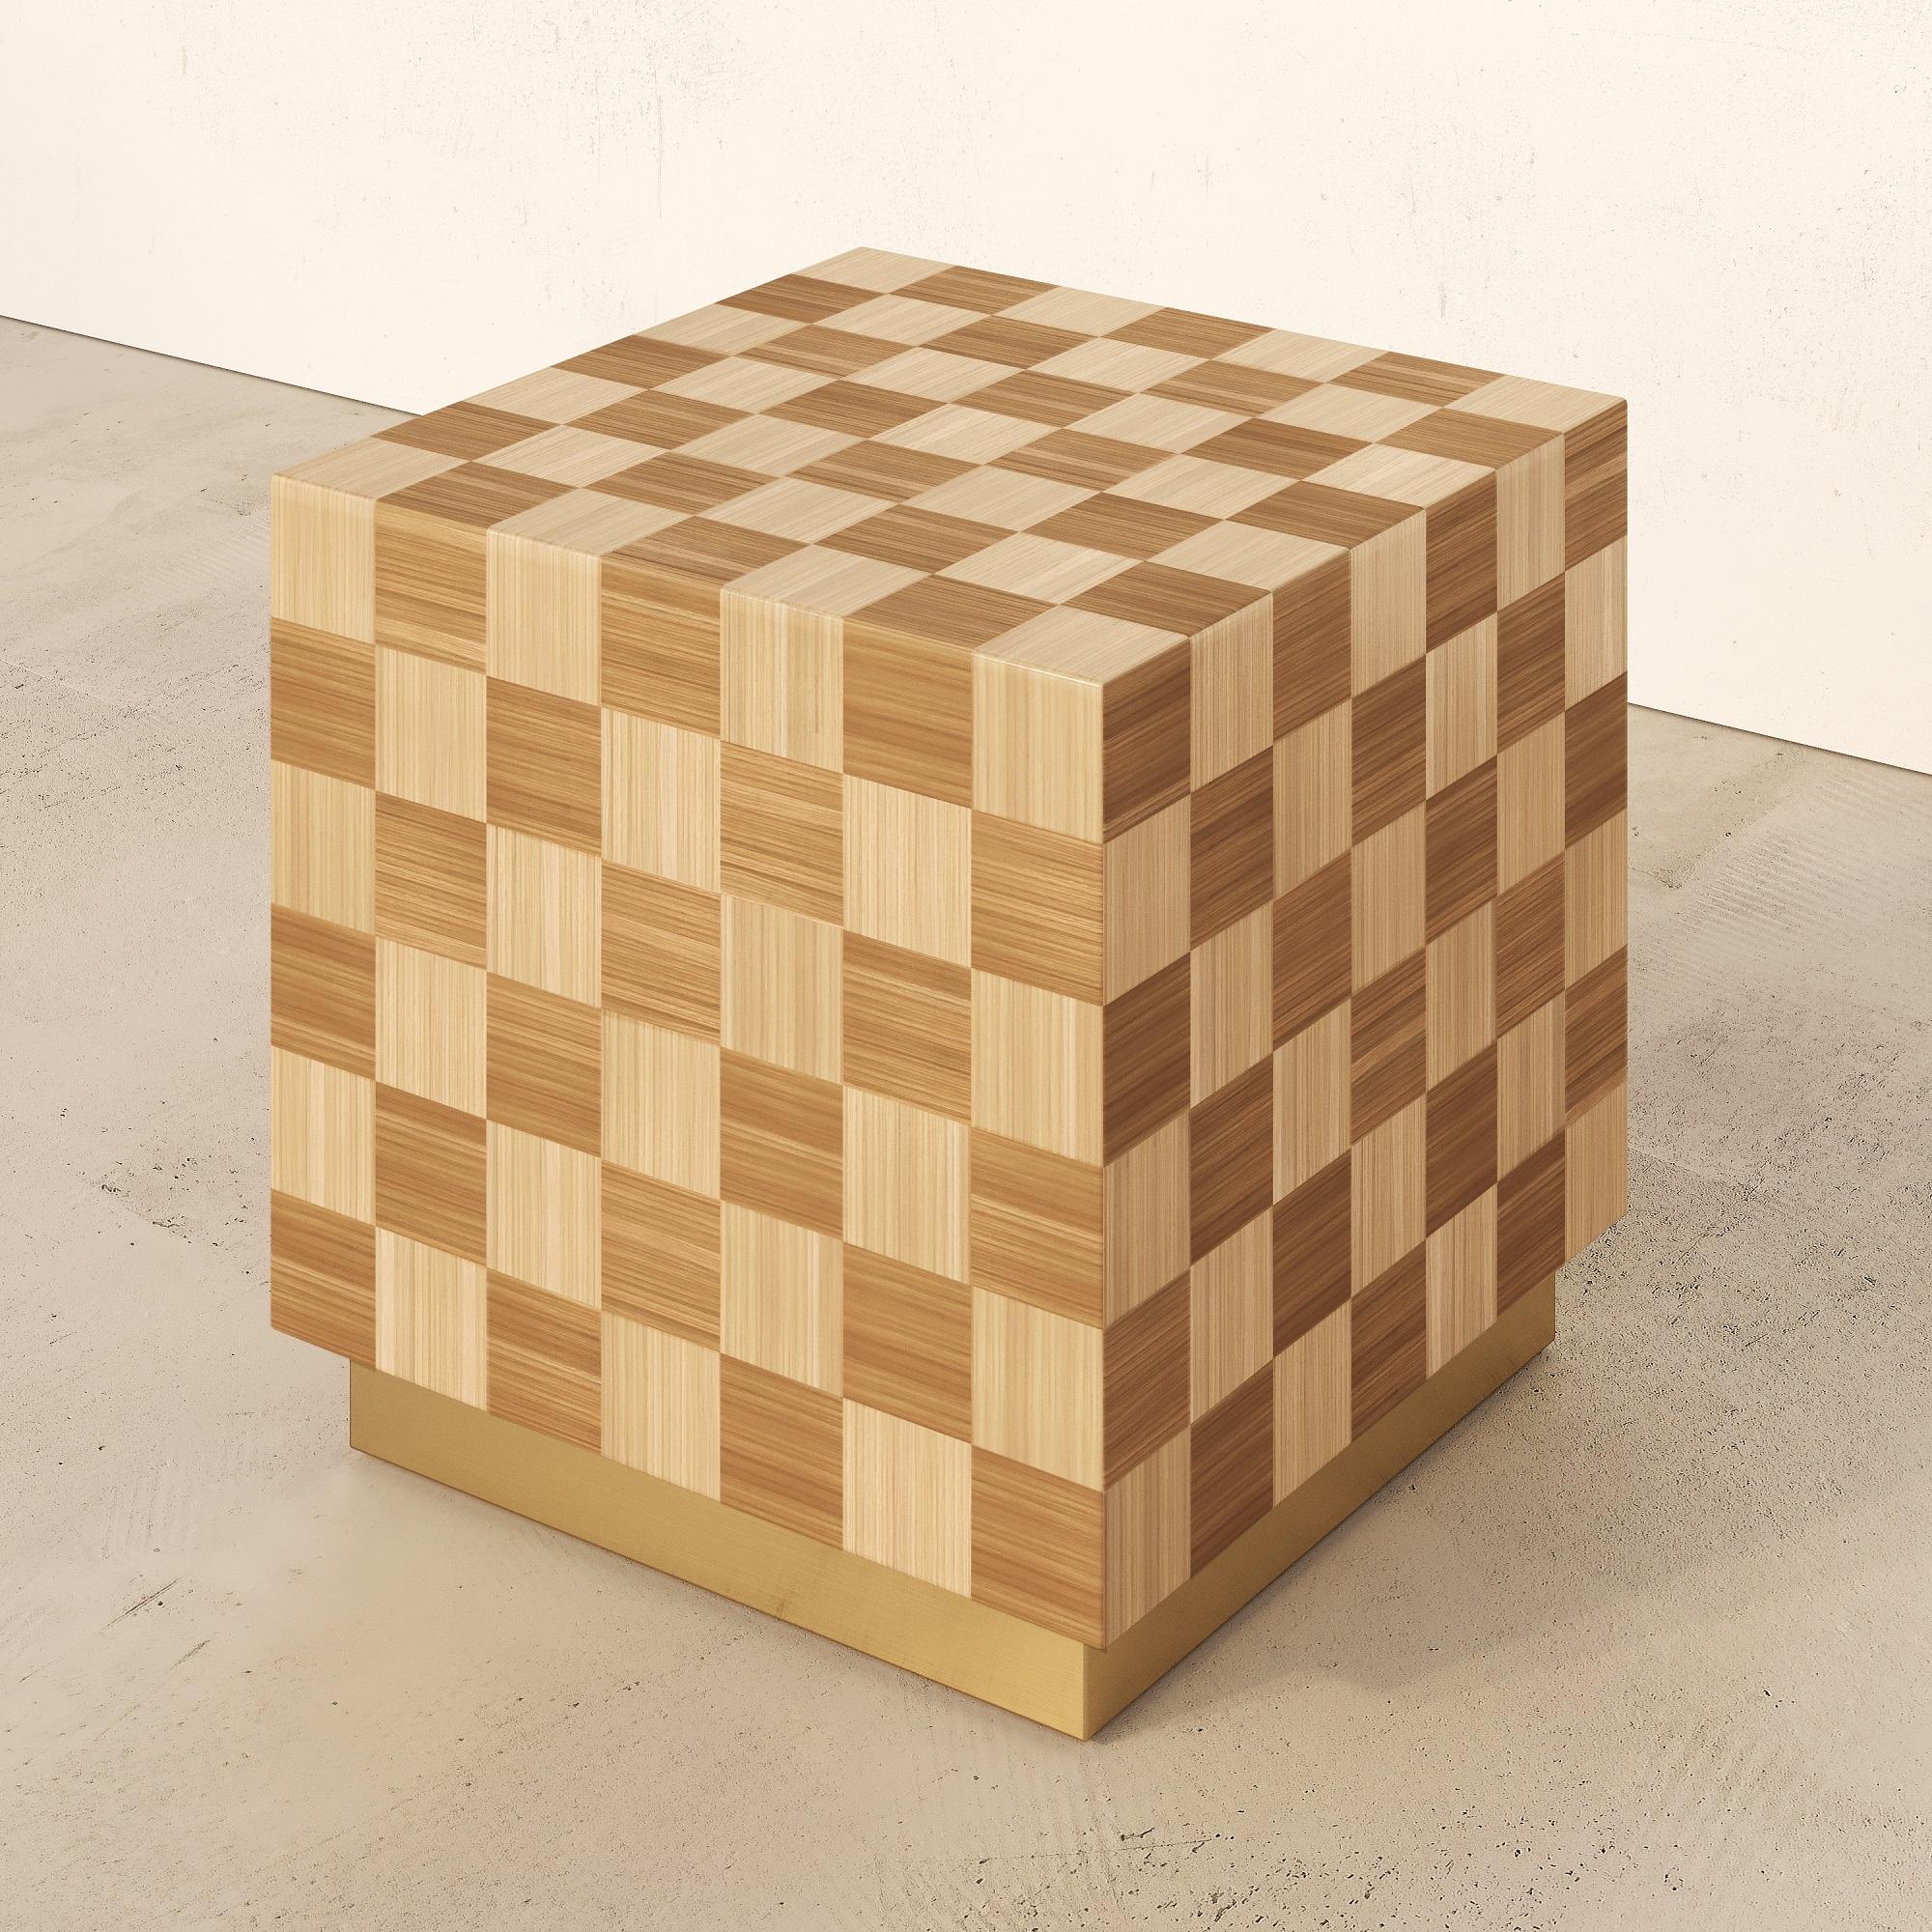 CUBE SIDE TABLE in straw marquetry technique

Inlay scheme: Weave
Colour scheme: Beige
MATERIALS: MDF, painted rye straw, wax
DIMENSIONS (cm): 40x40x45.
Dimensions and colours are customizable
Packaging dimensions (cm): 50 x 50 x H 55
Weight: 20